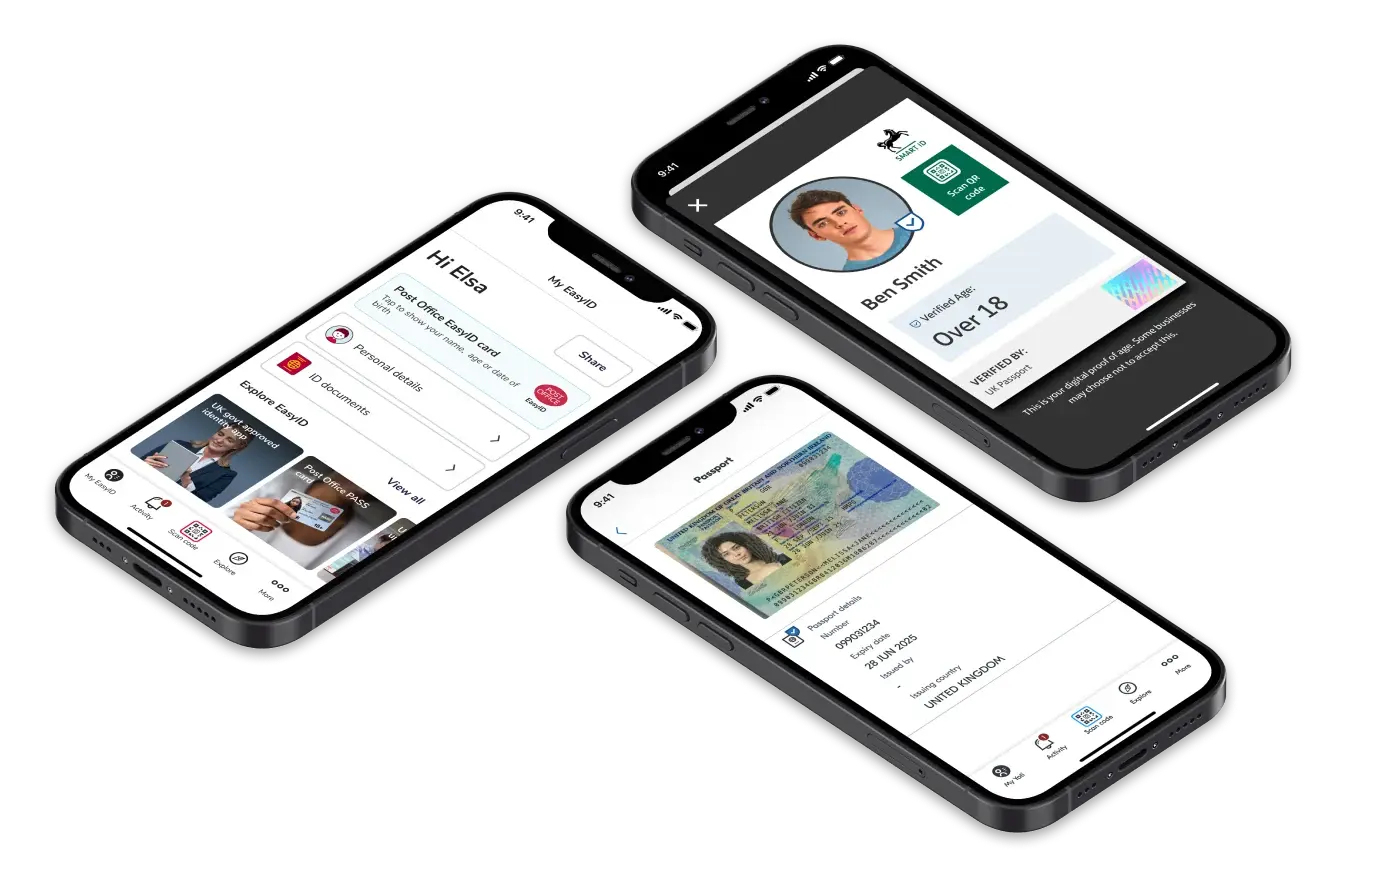 Three smartphone screens displaying the homepage in the Post Office Easy ID app, the passport details page in the Yoti ID app, and an "age over" atribute in the Lloyds Bank Smart ID app.